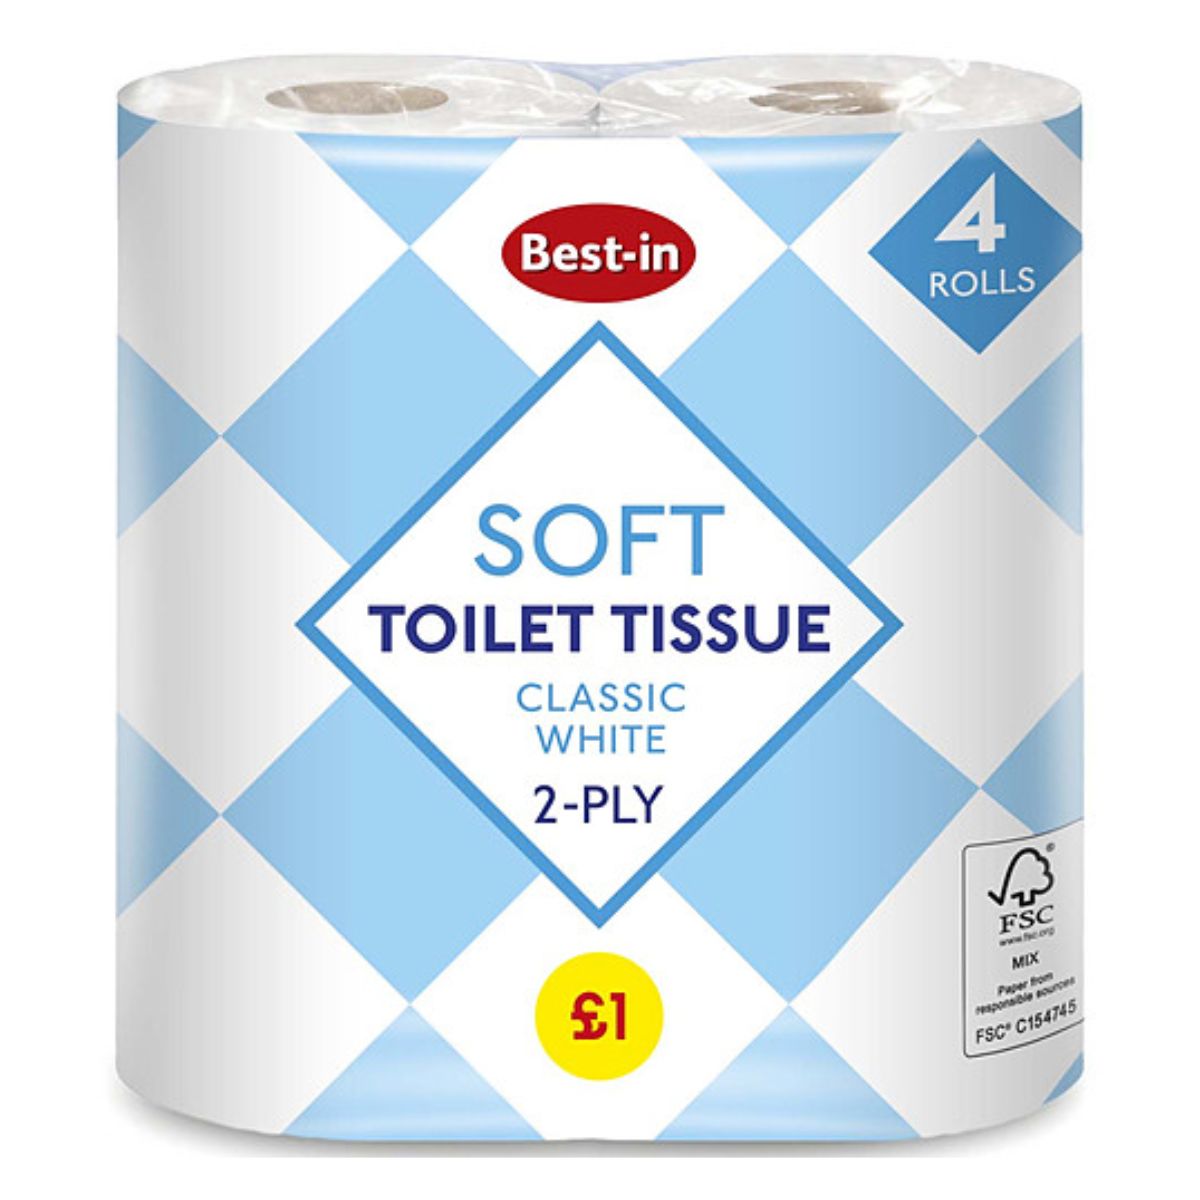 Pack of Best In - Sofft Toilet Tissue White - 4pcs in clear plastic wrapping, marked with a blue and white design and priced at £1.